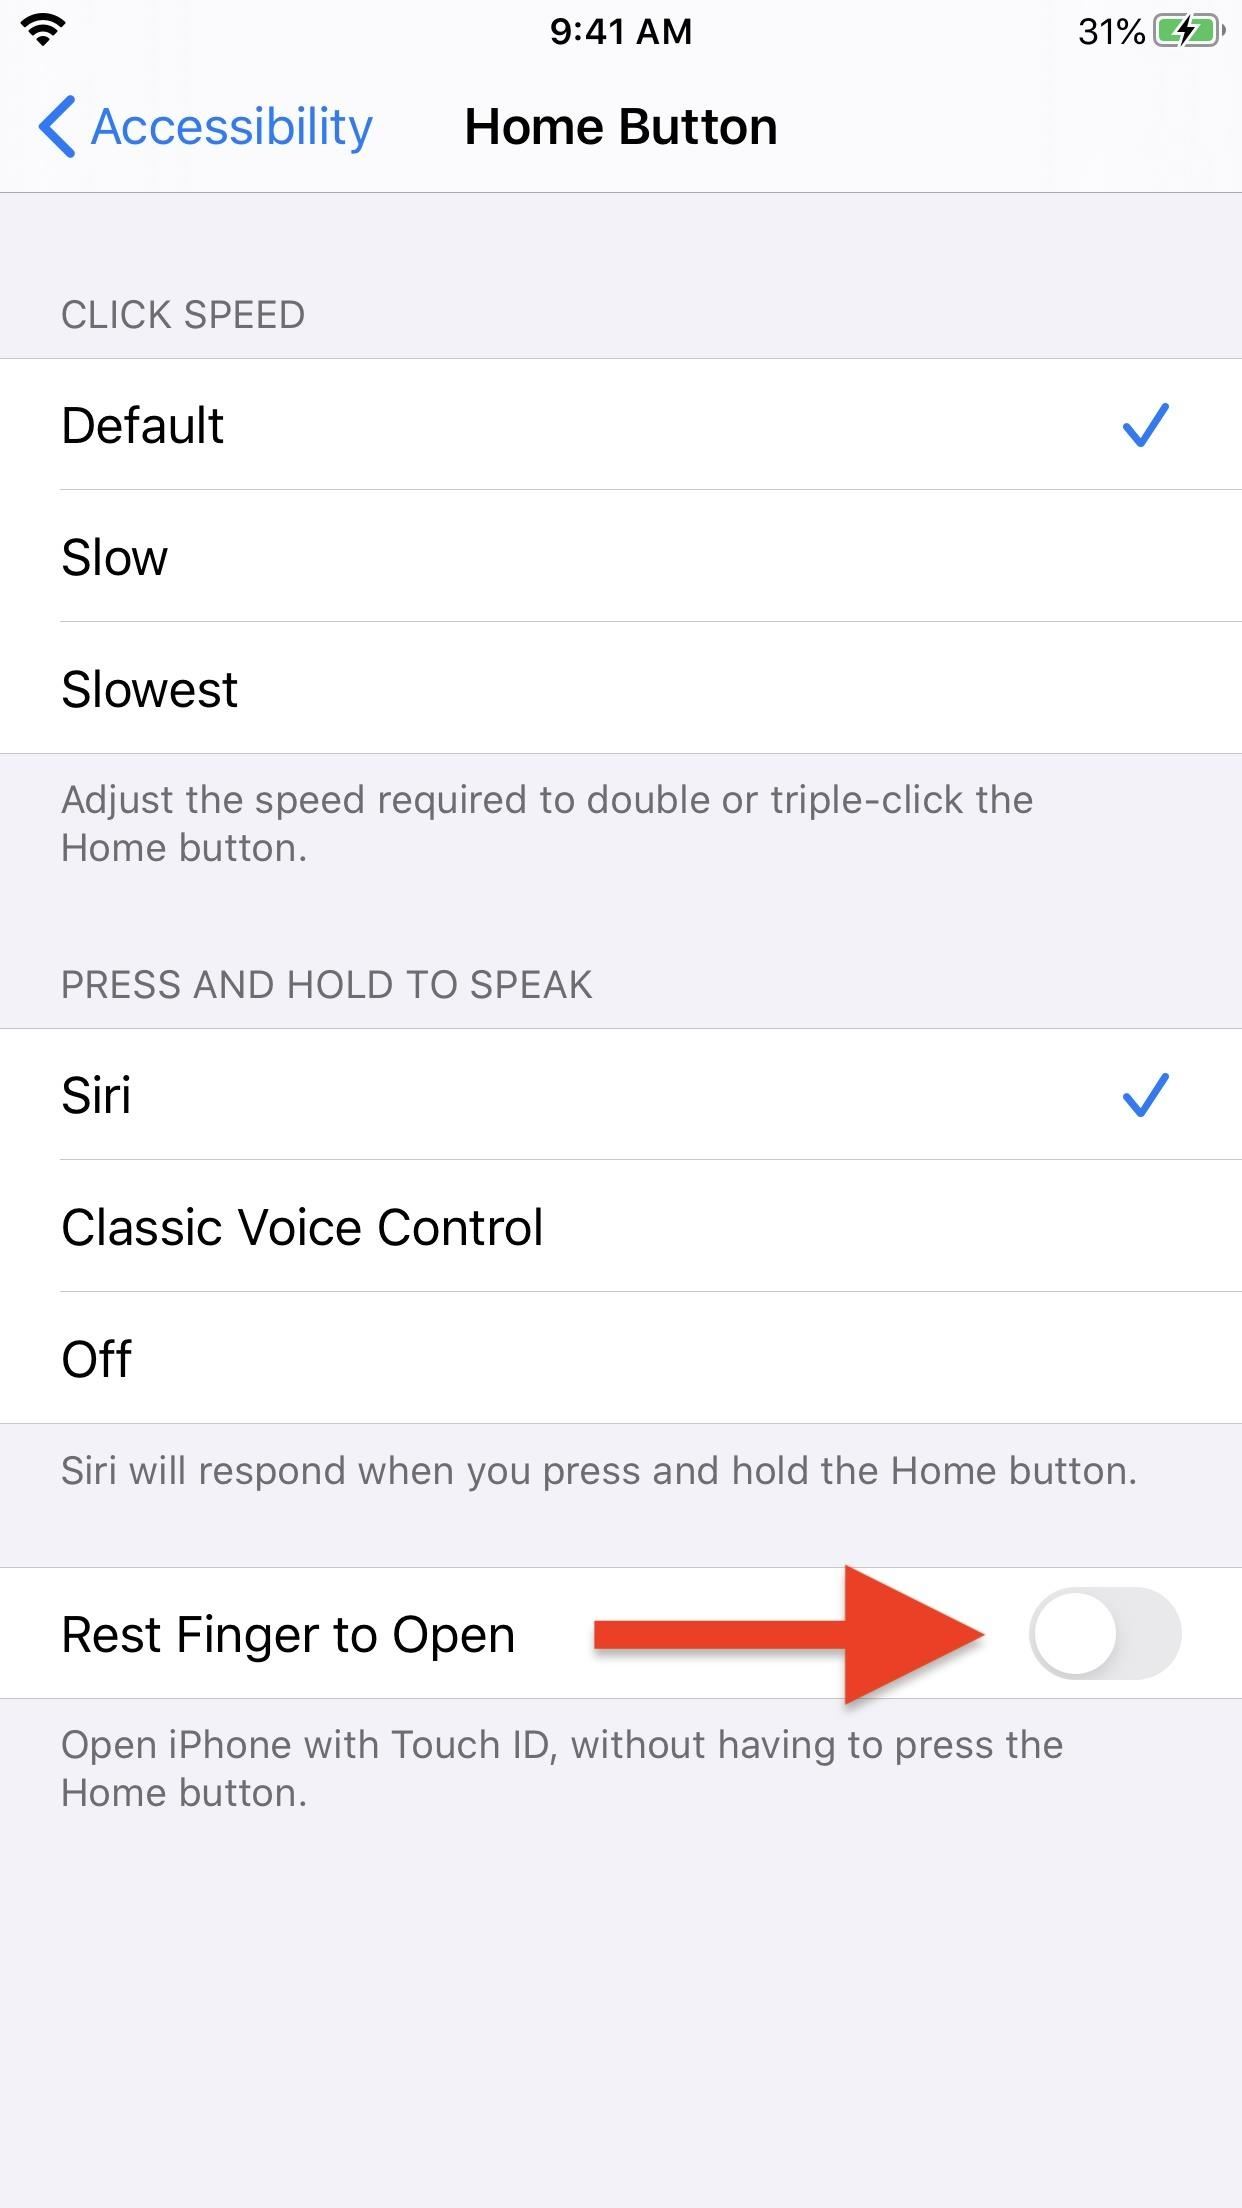 Prevent Thieves from Turning On Your iPhone's Airplane Mode, So You Have a Better Chance to Track It Down